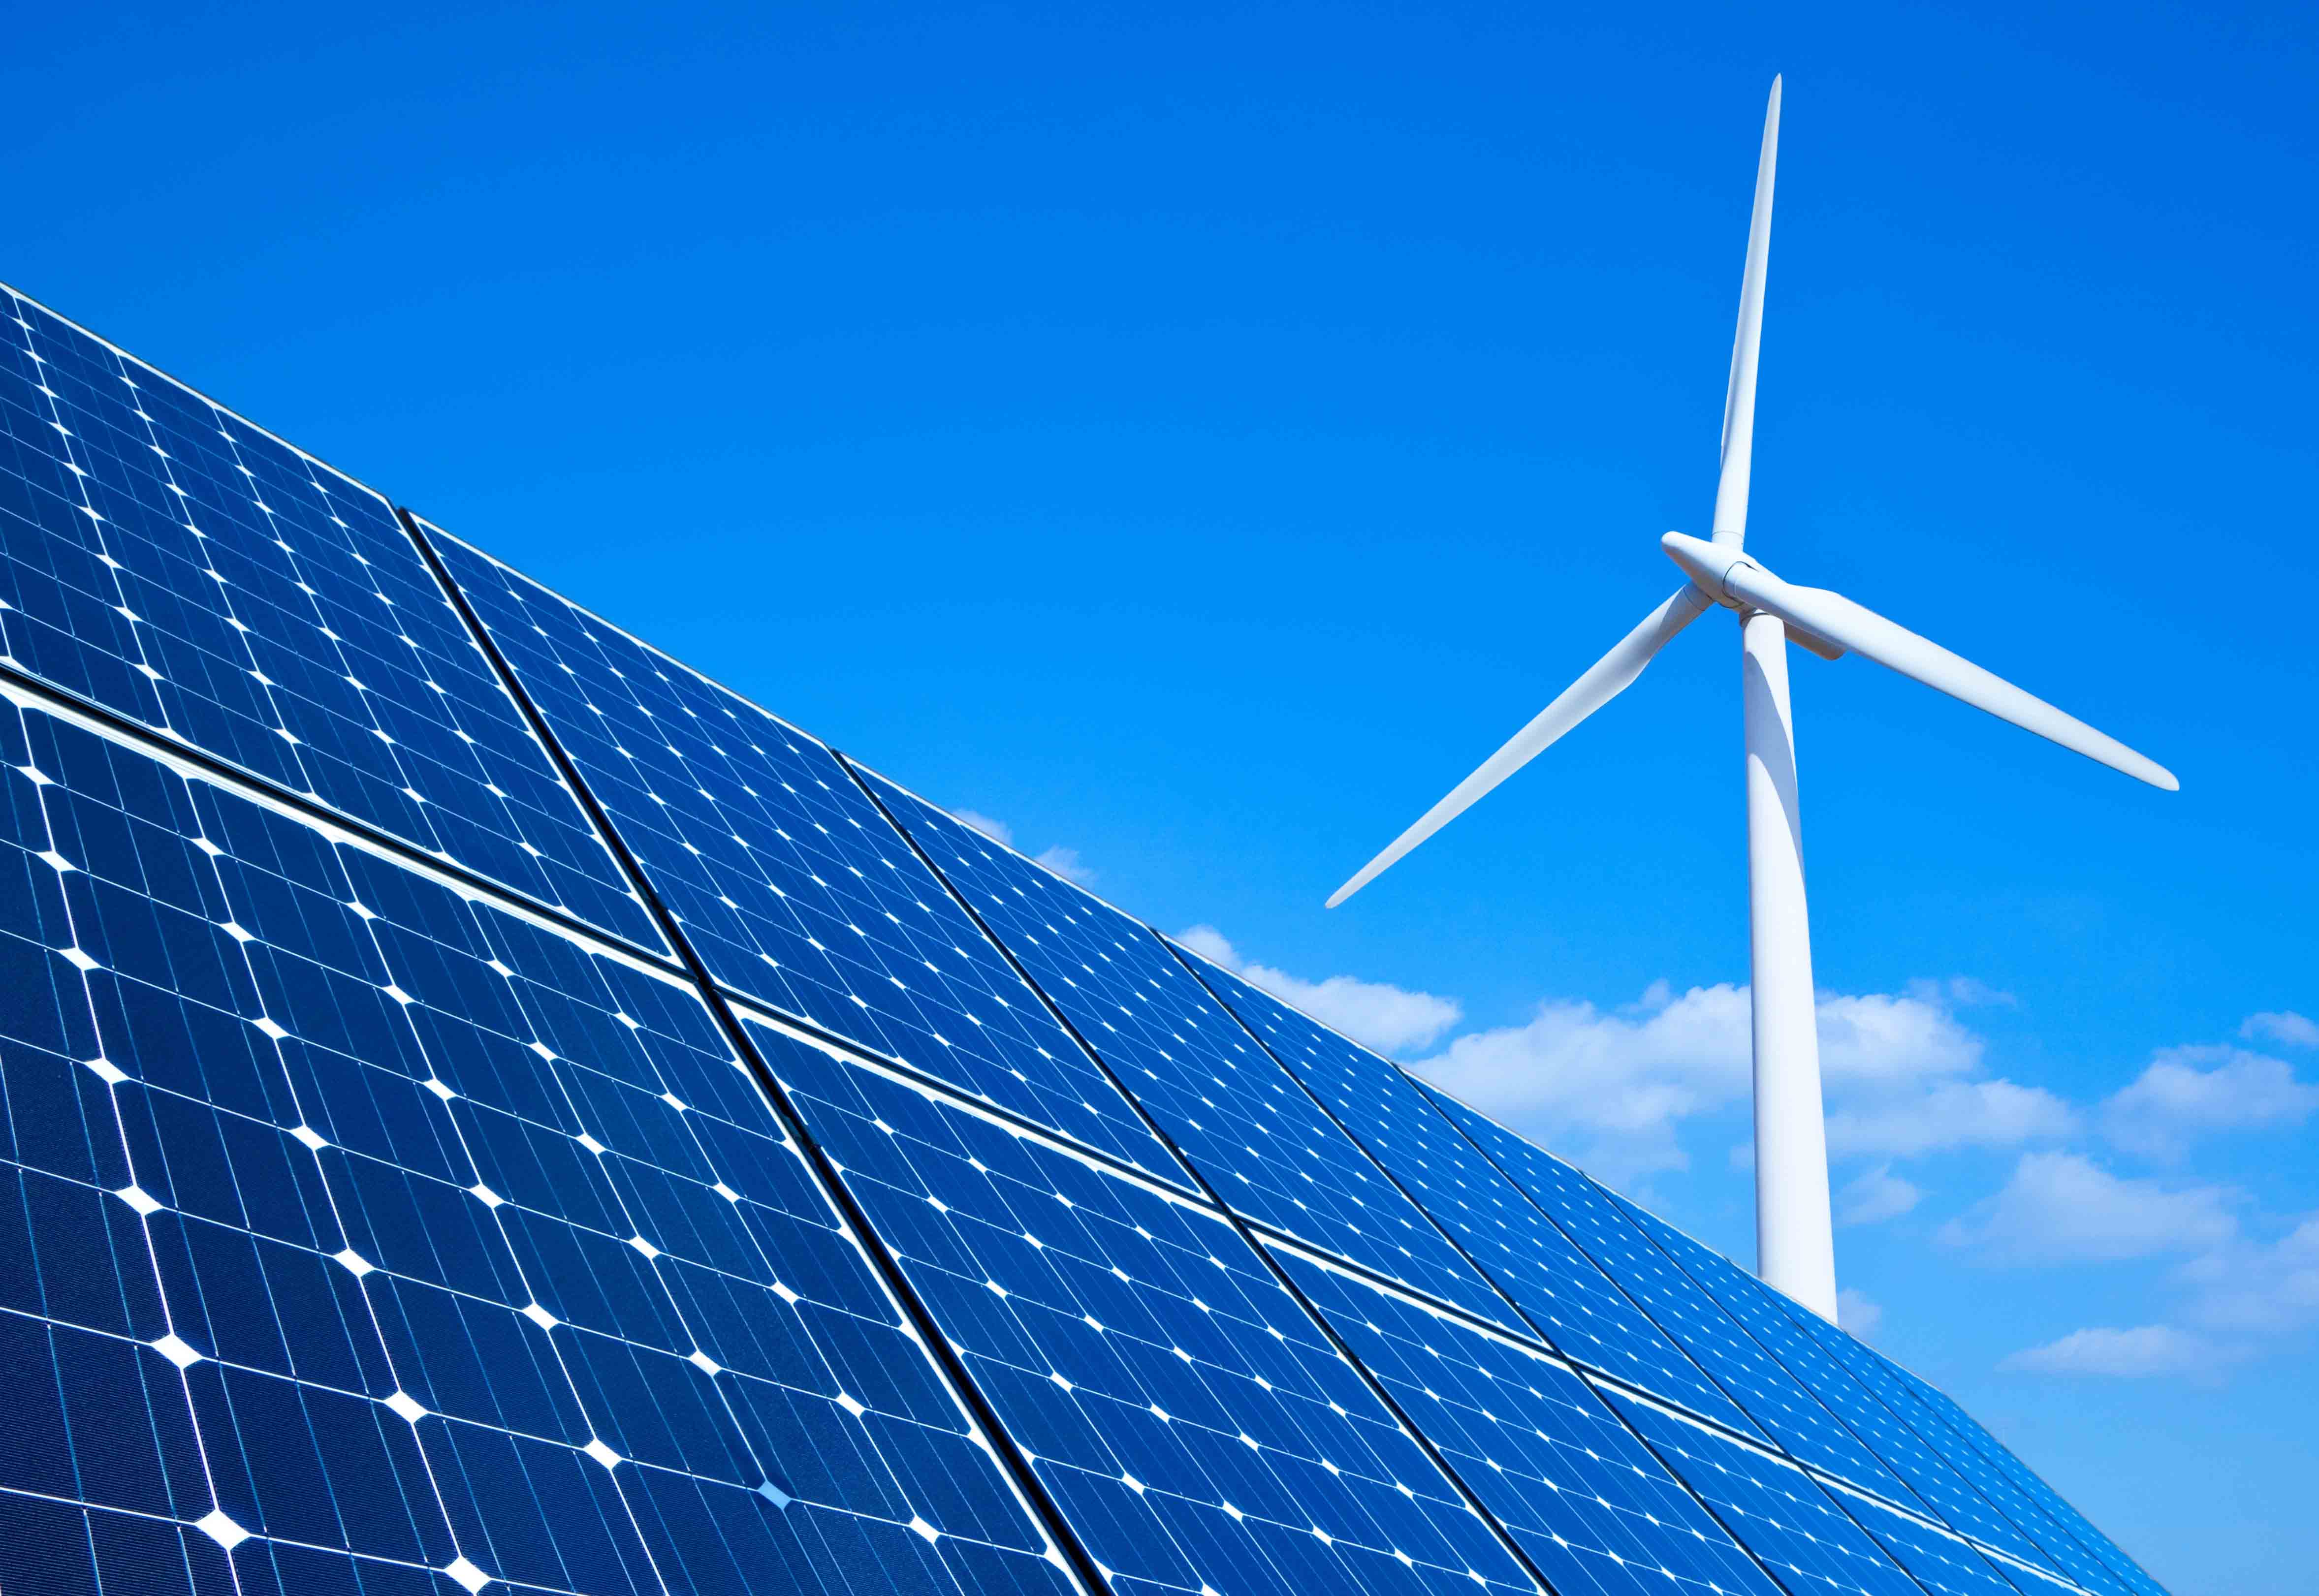 Renewable and Clean Energy: Powering the Future